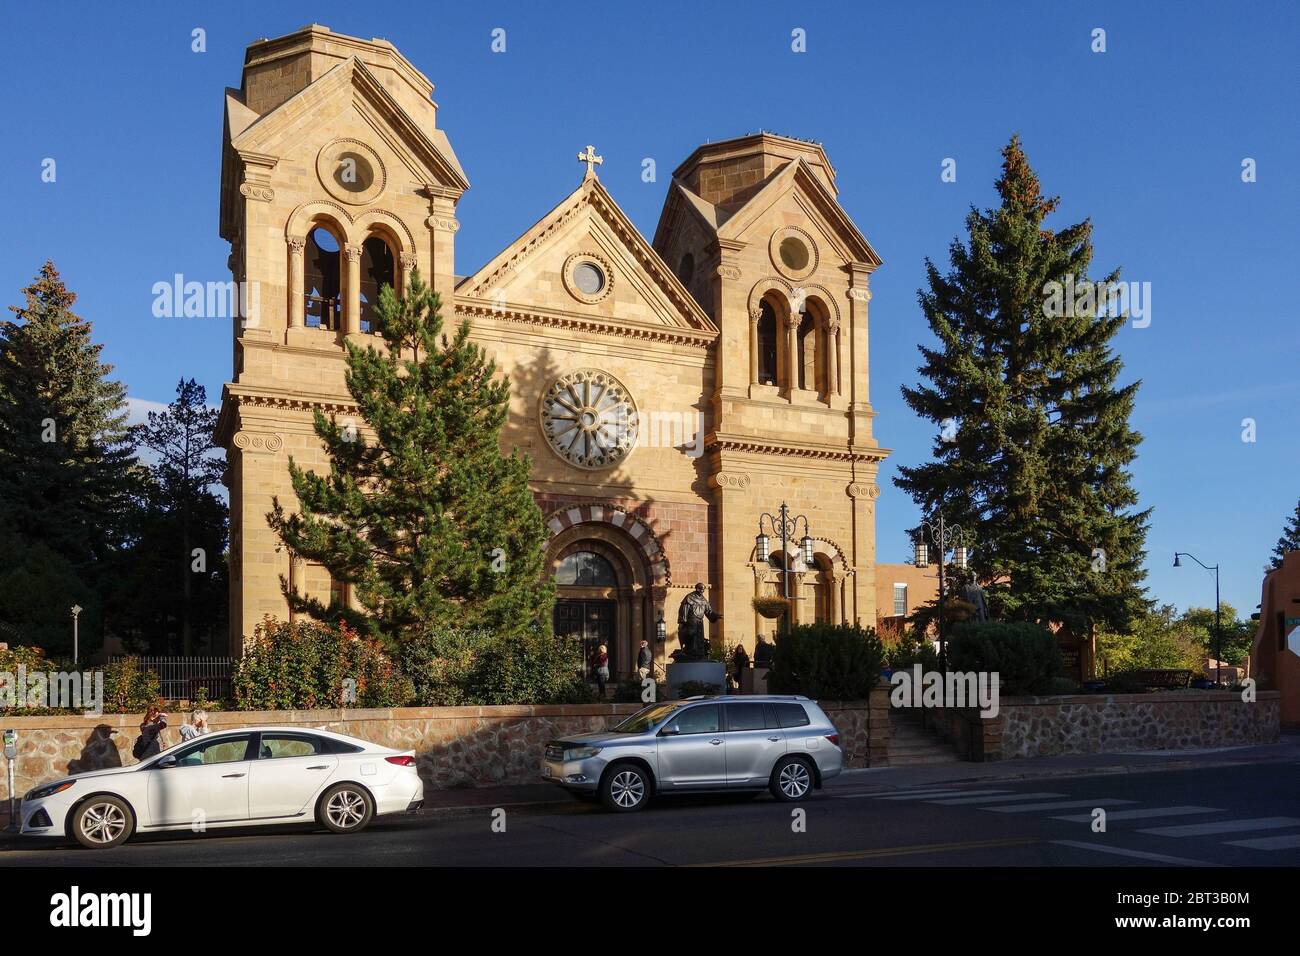 Cathedral Basilica of Saint Francis of Assisi also known as Saint Francis Cathedral in Santa Fe, New Mexico. Stock Photo